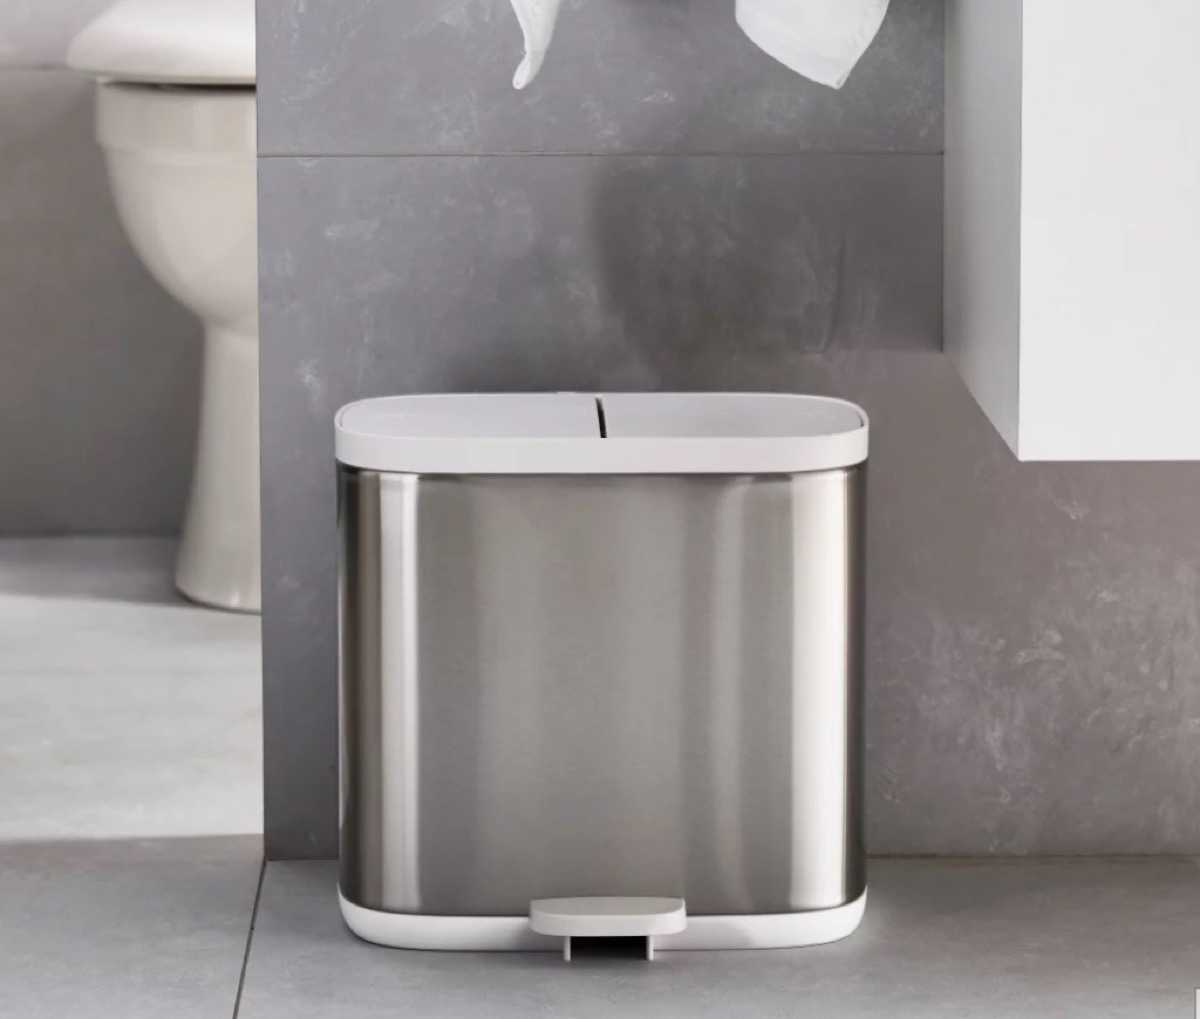 silver trash can with white top in a modern bathroom, bathroom accessories